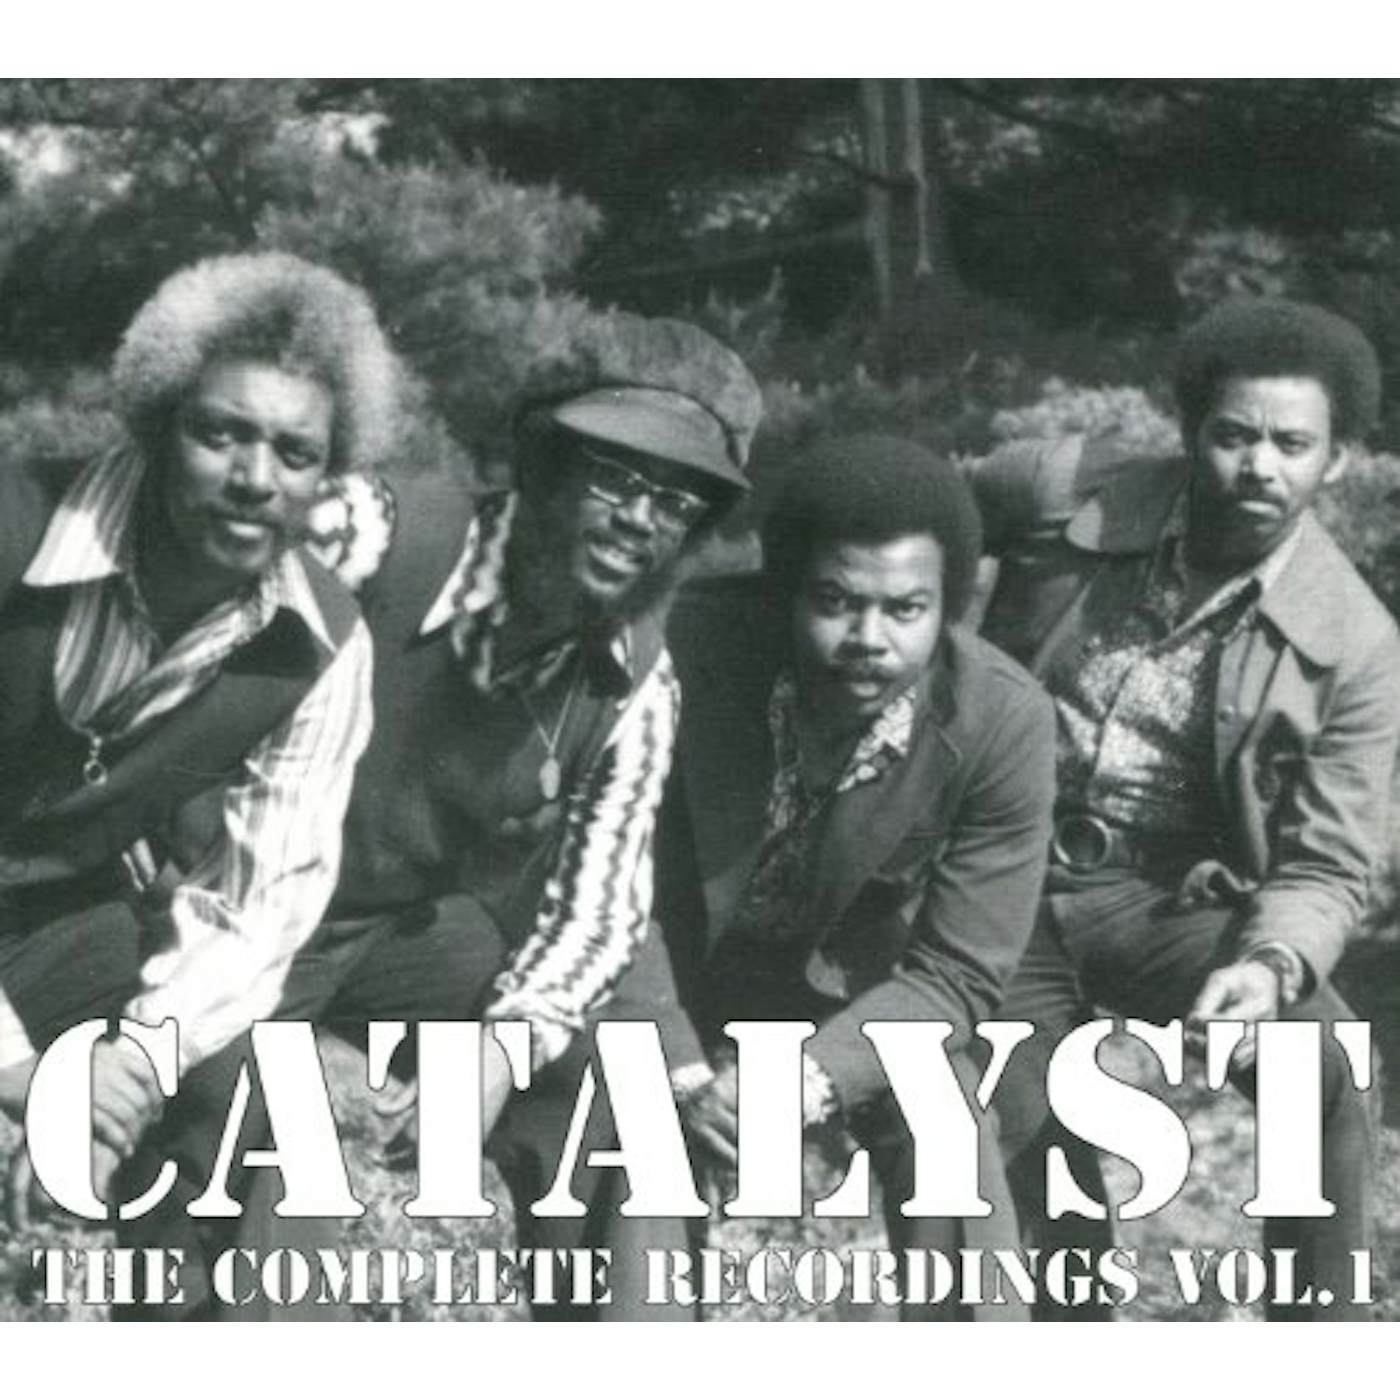 Catalyst COMPLETE RECORDINGS 1 CD